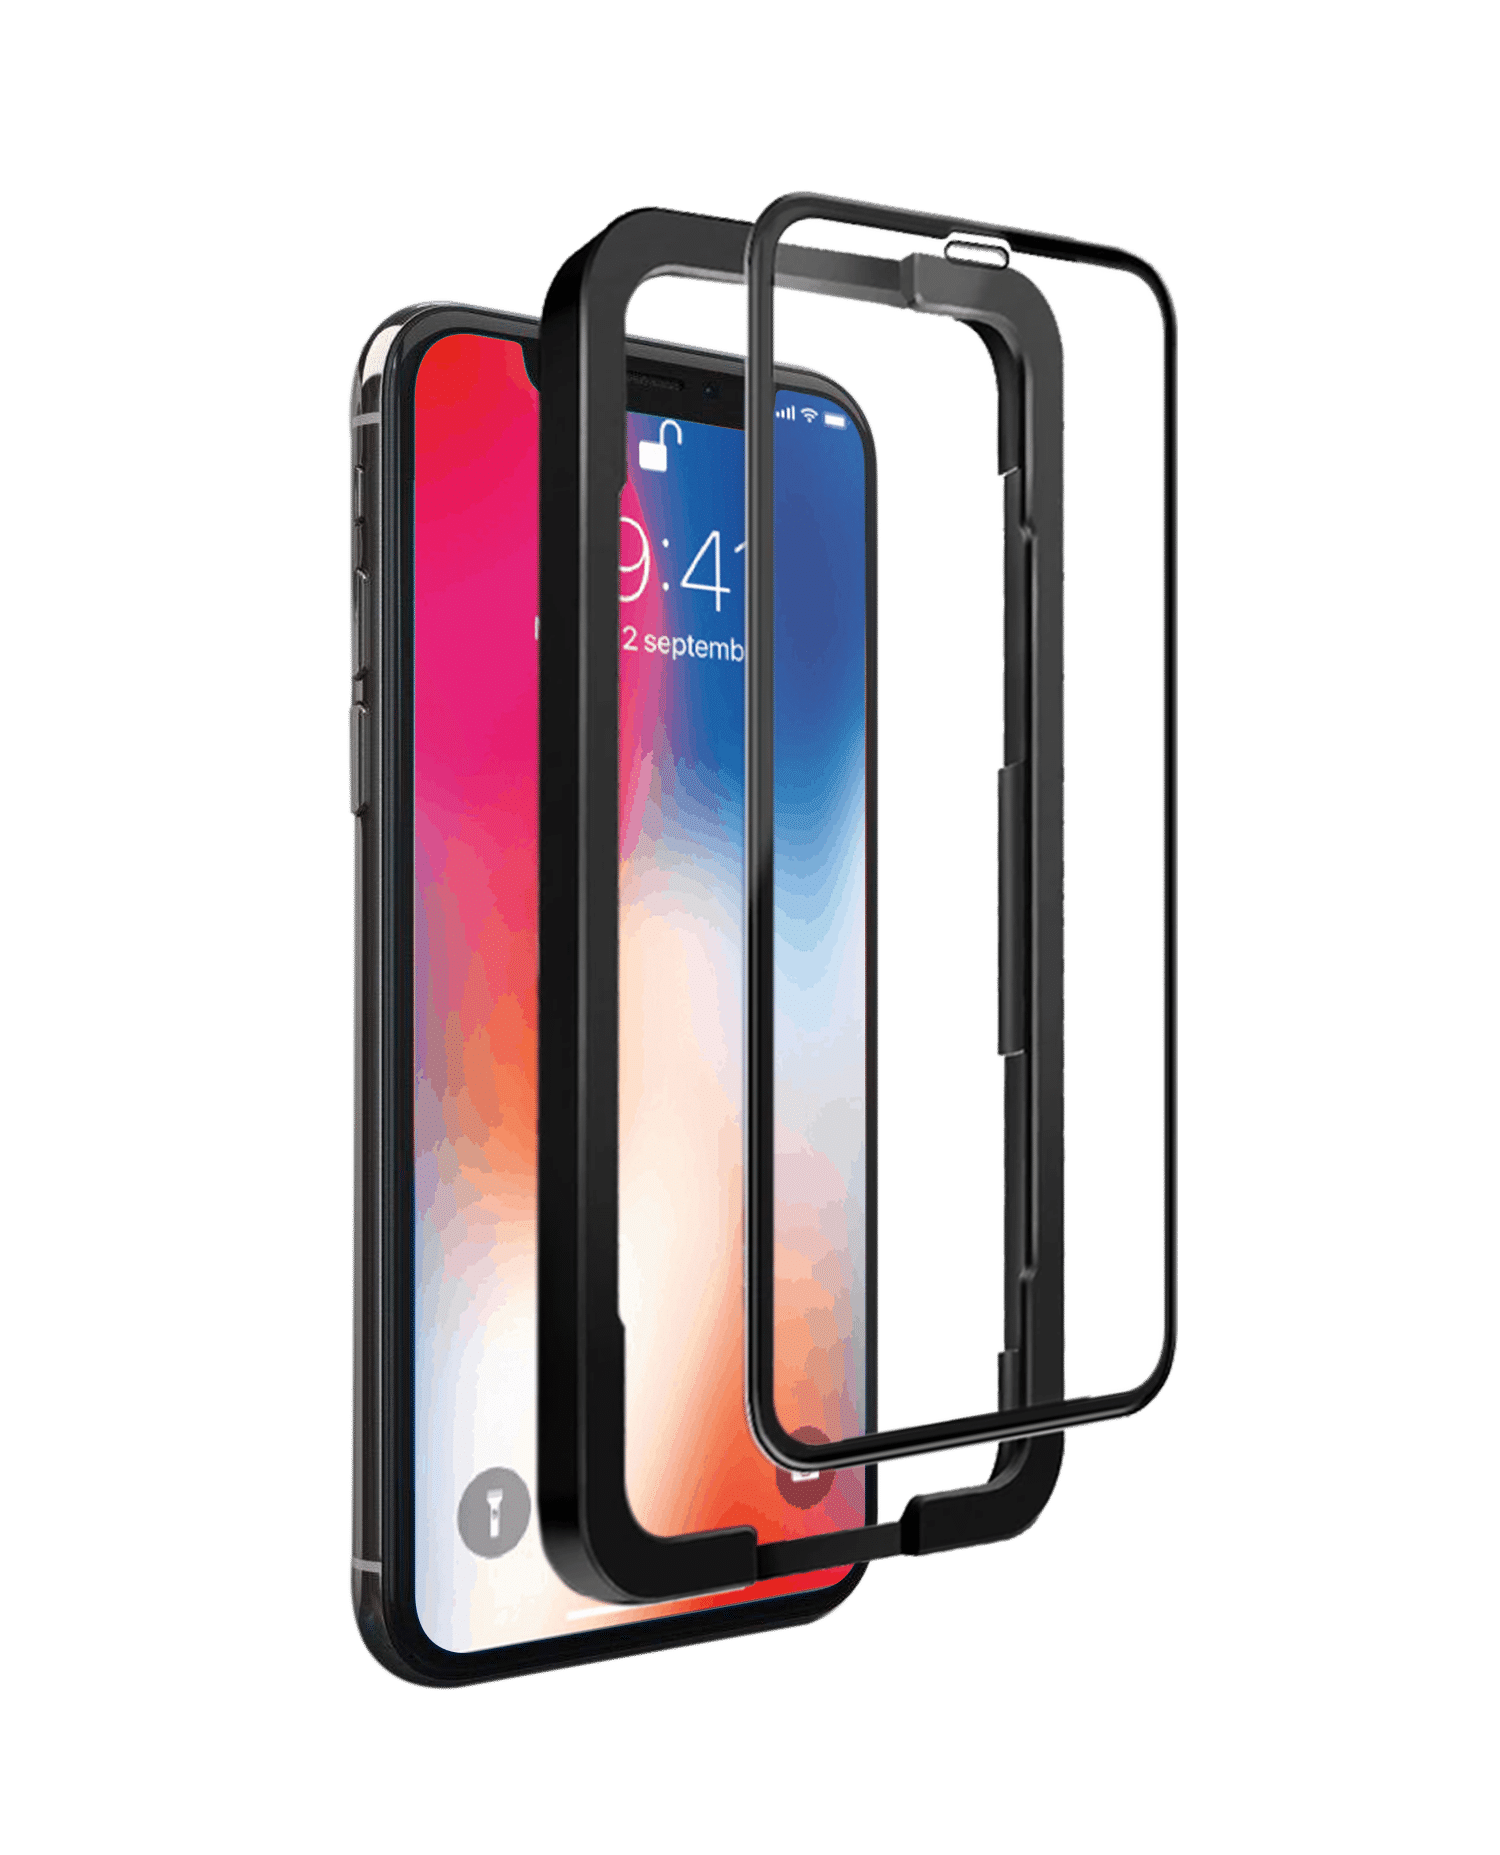 iPhone XR - 9D Tempered Glass Screen Protector with Applicator